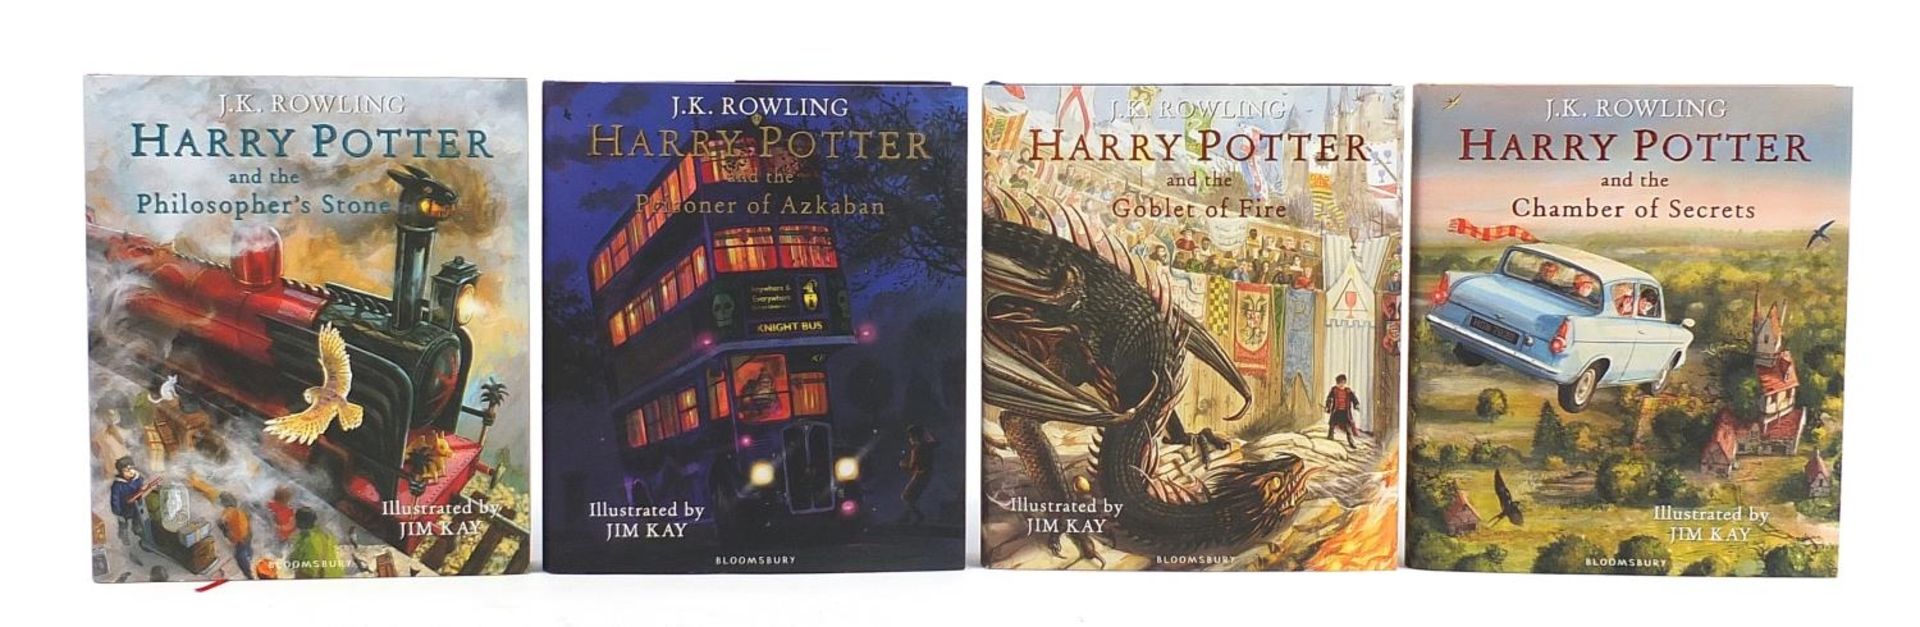 Four Harry Potter hardback books published by Bloomsbury, by J K Rowling and illustrated by Jim Kay